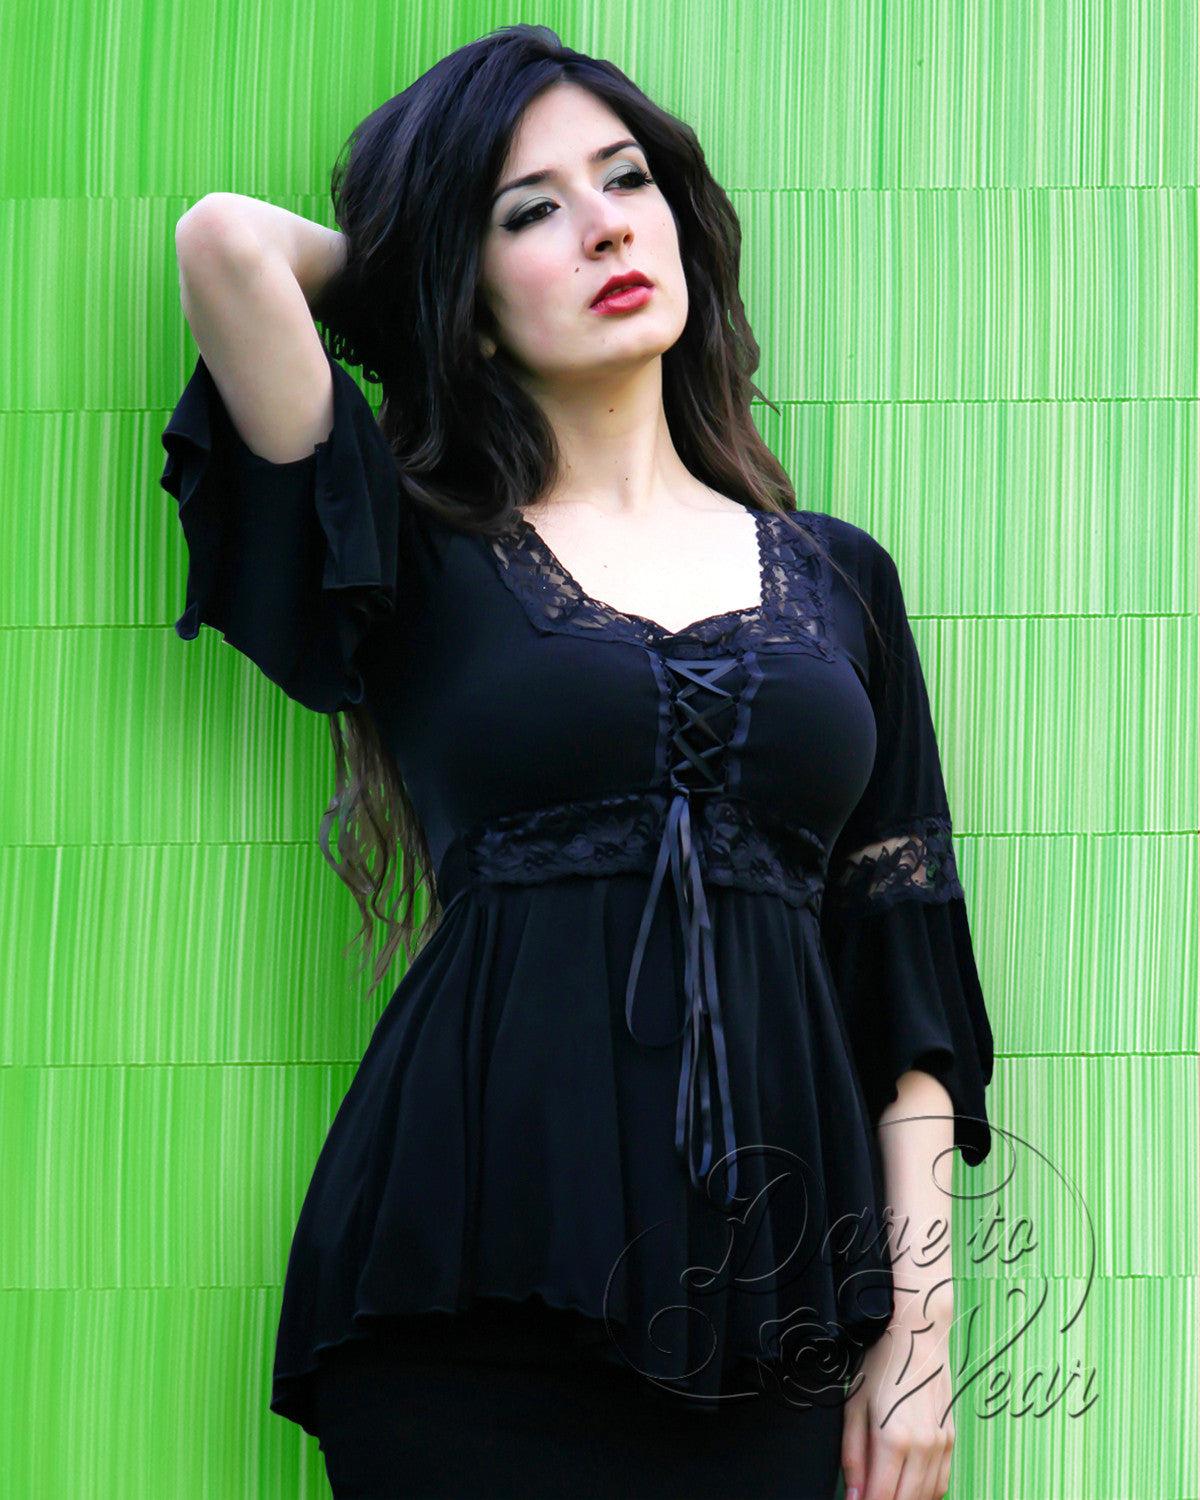 Gothic Corset Top with lace